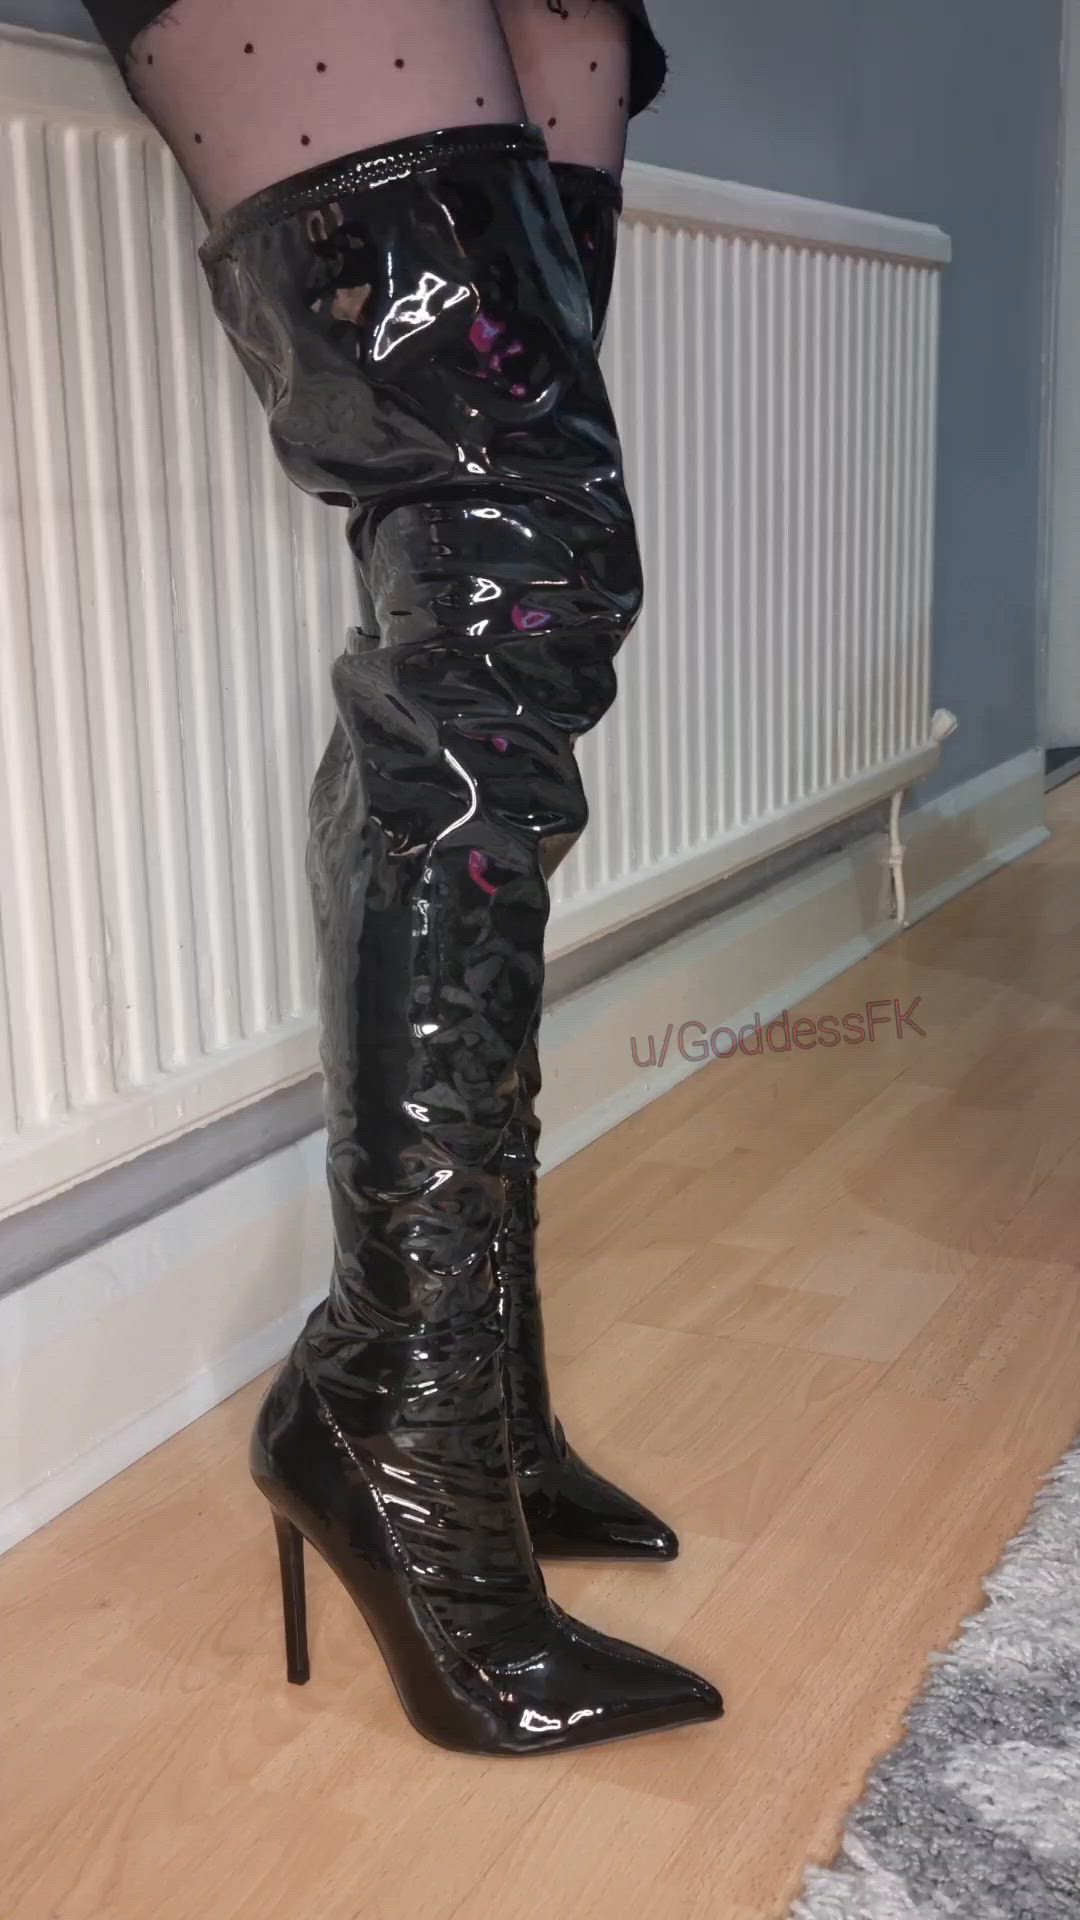 Boots porn video with onlyfans model GoddessFK <strong>@goddessfootkink</strong>